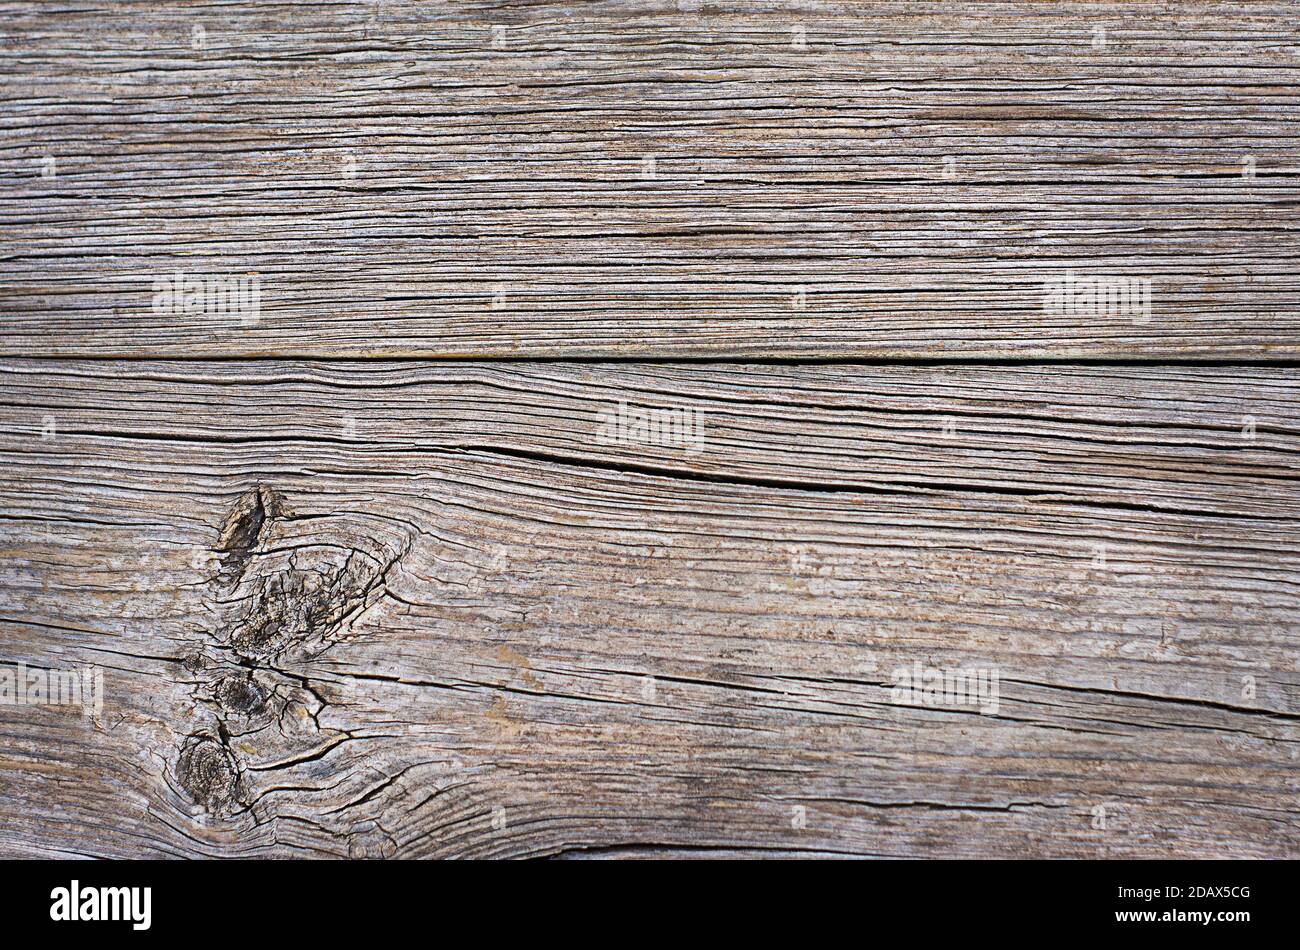 Wood texture background, old natural wood Stock Photo